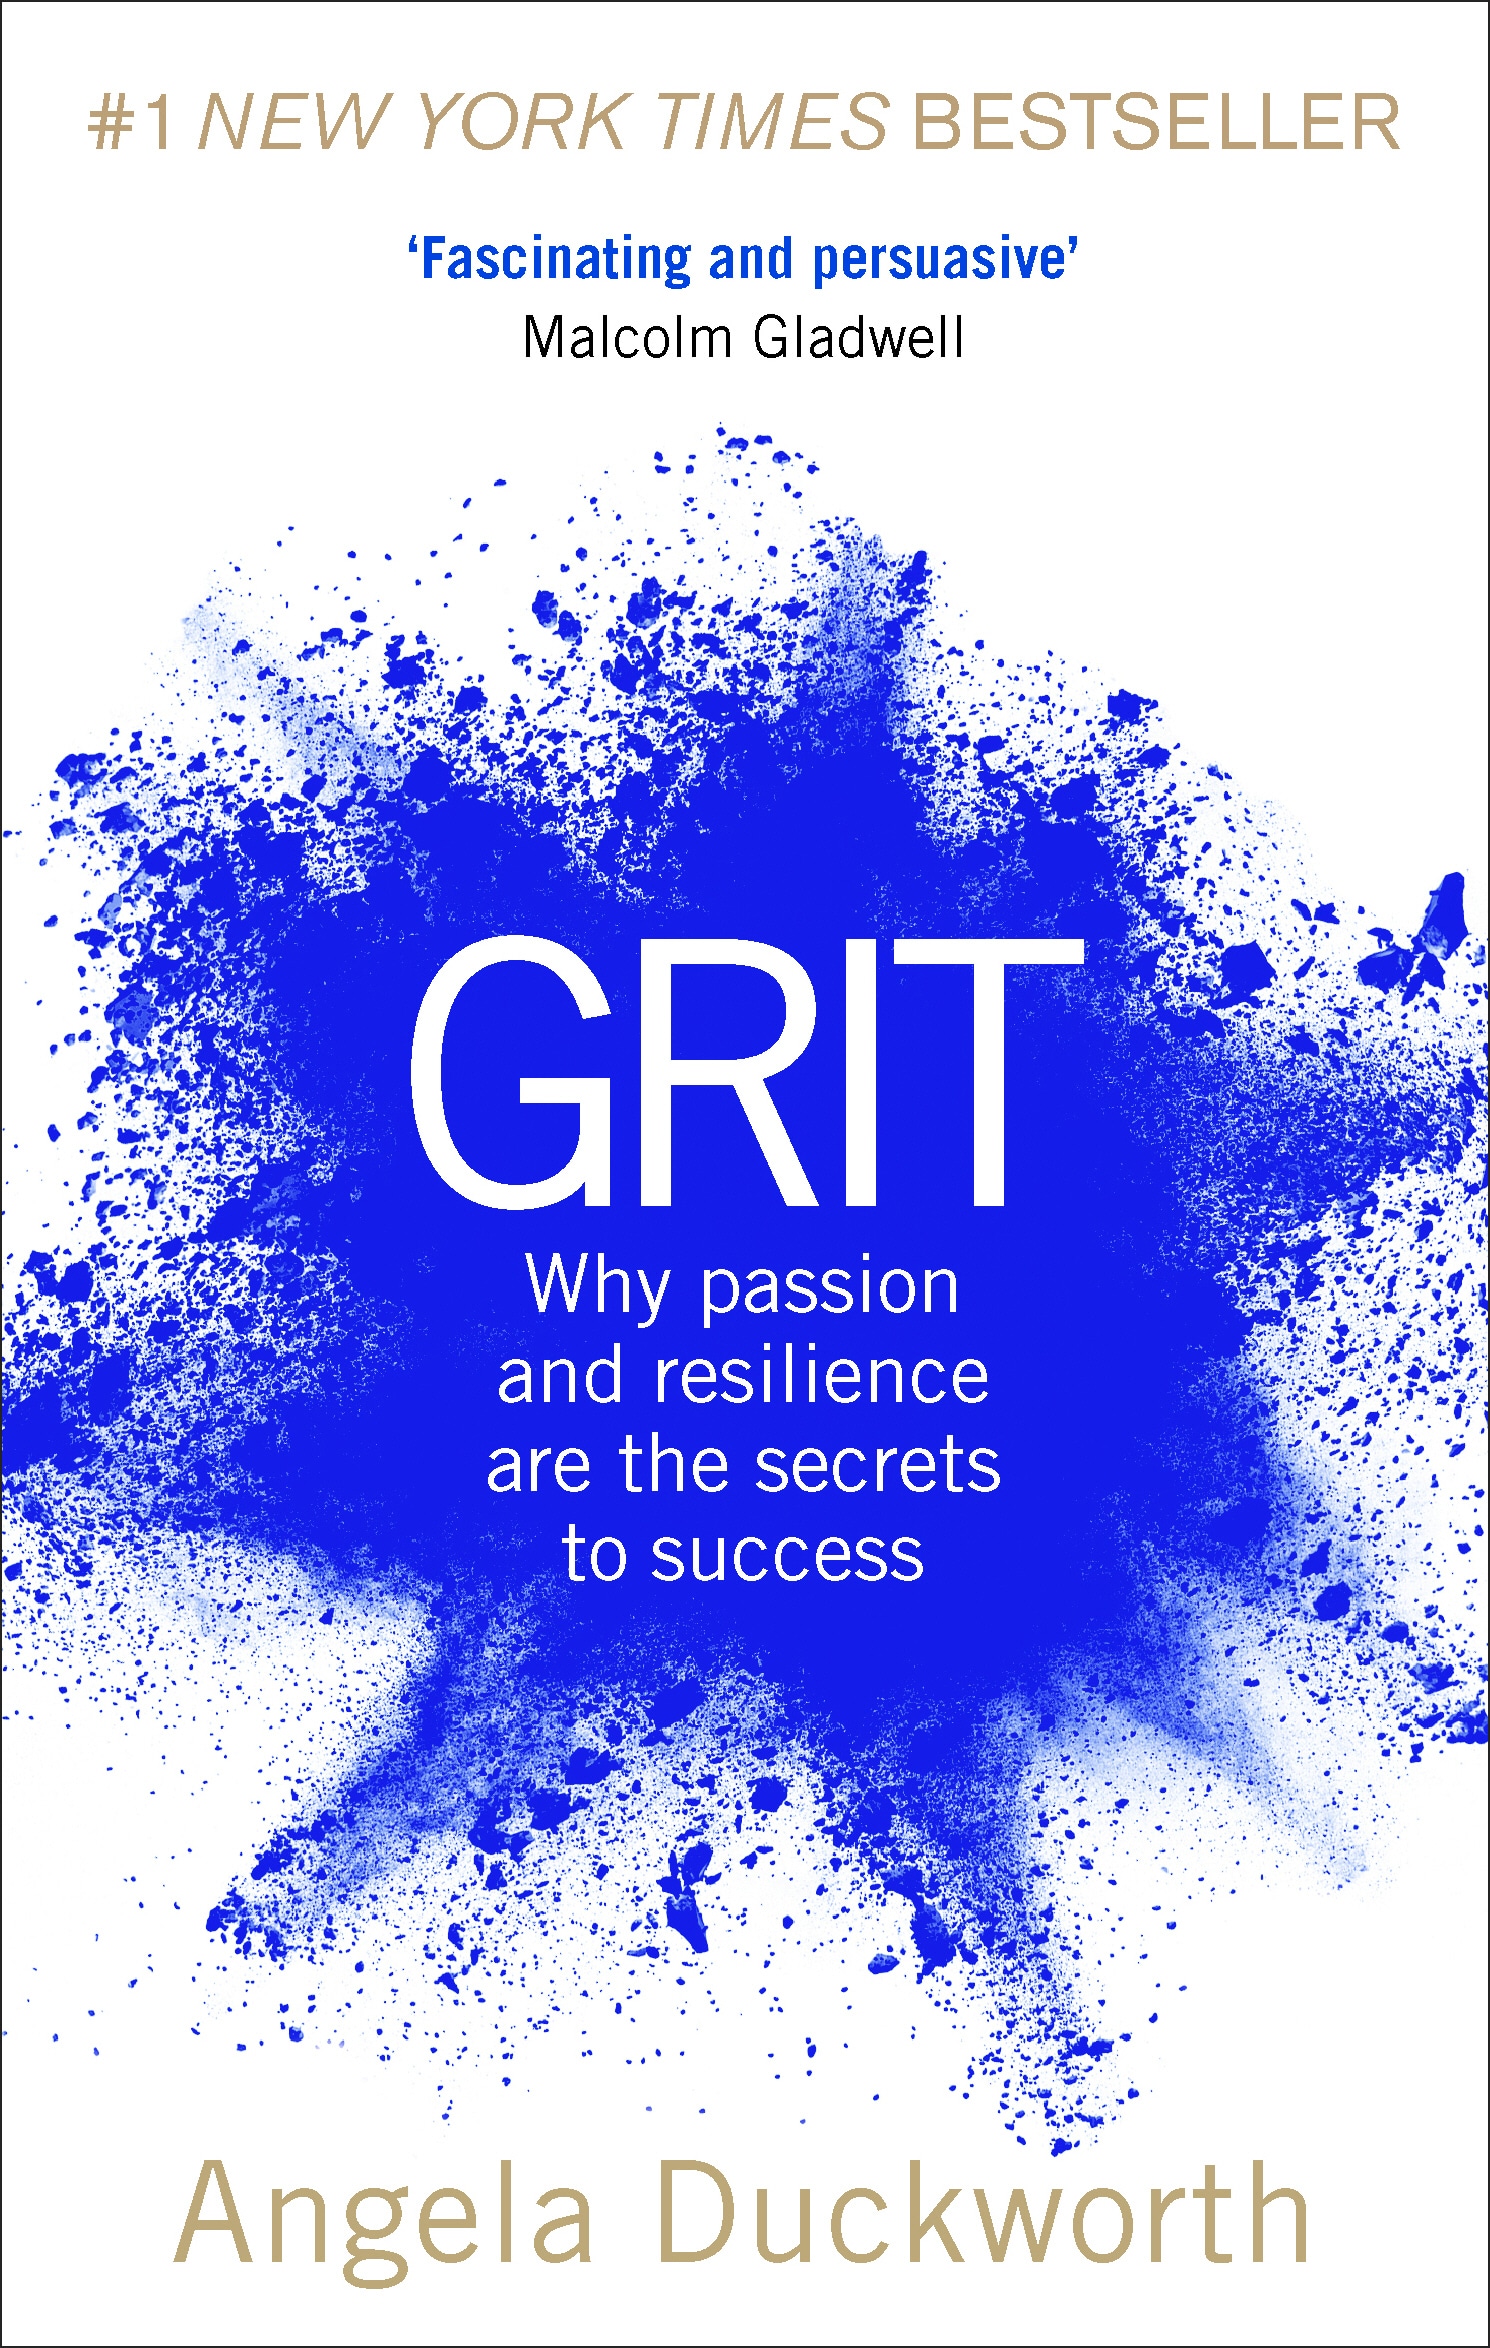 Book “Grit” by Angela Duckworth — May 4, 2017